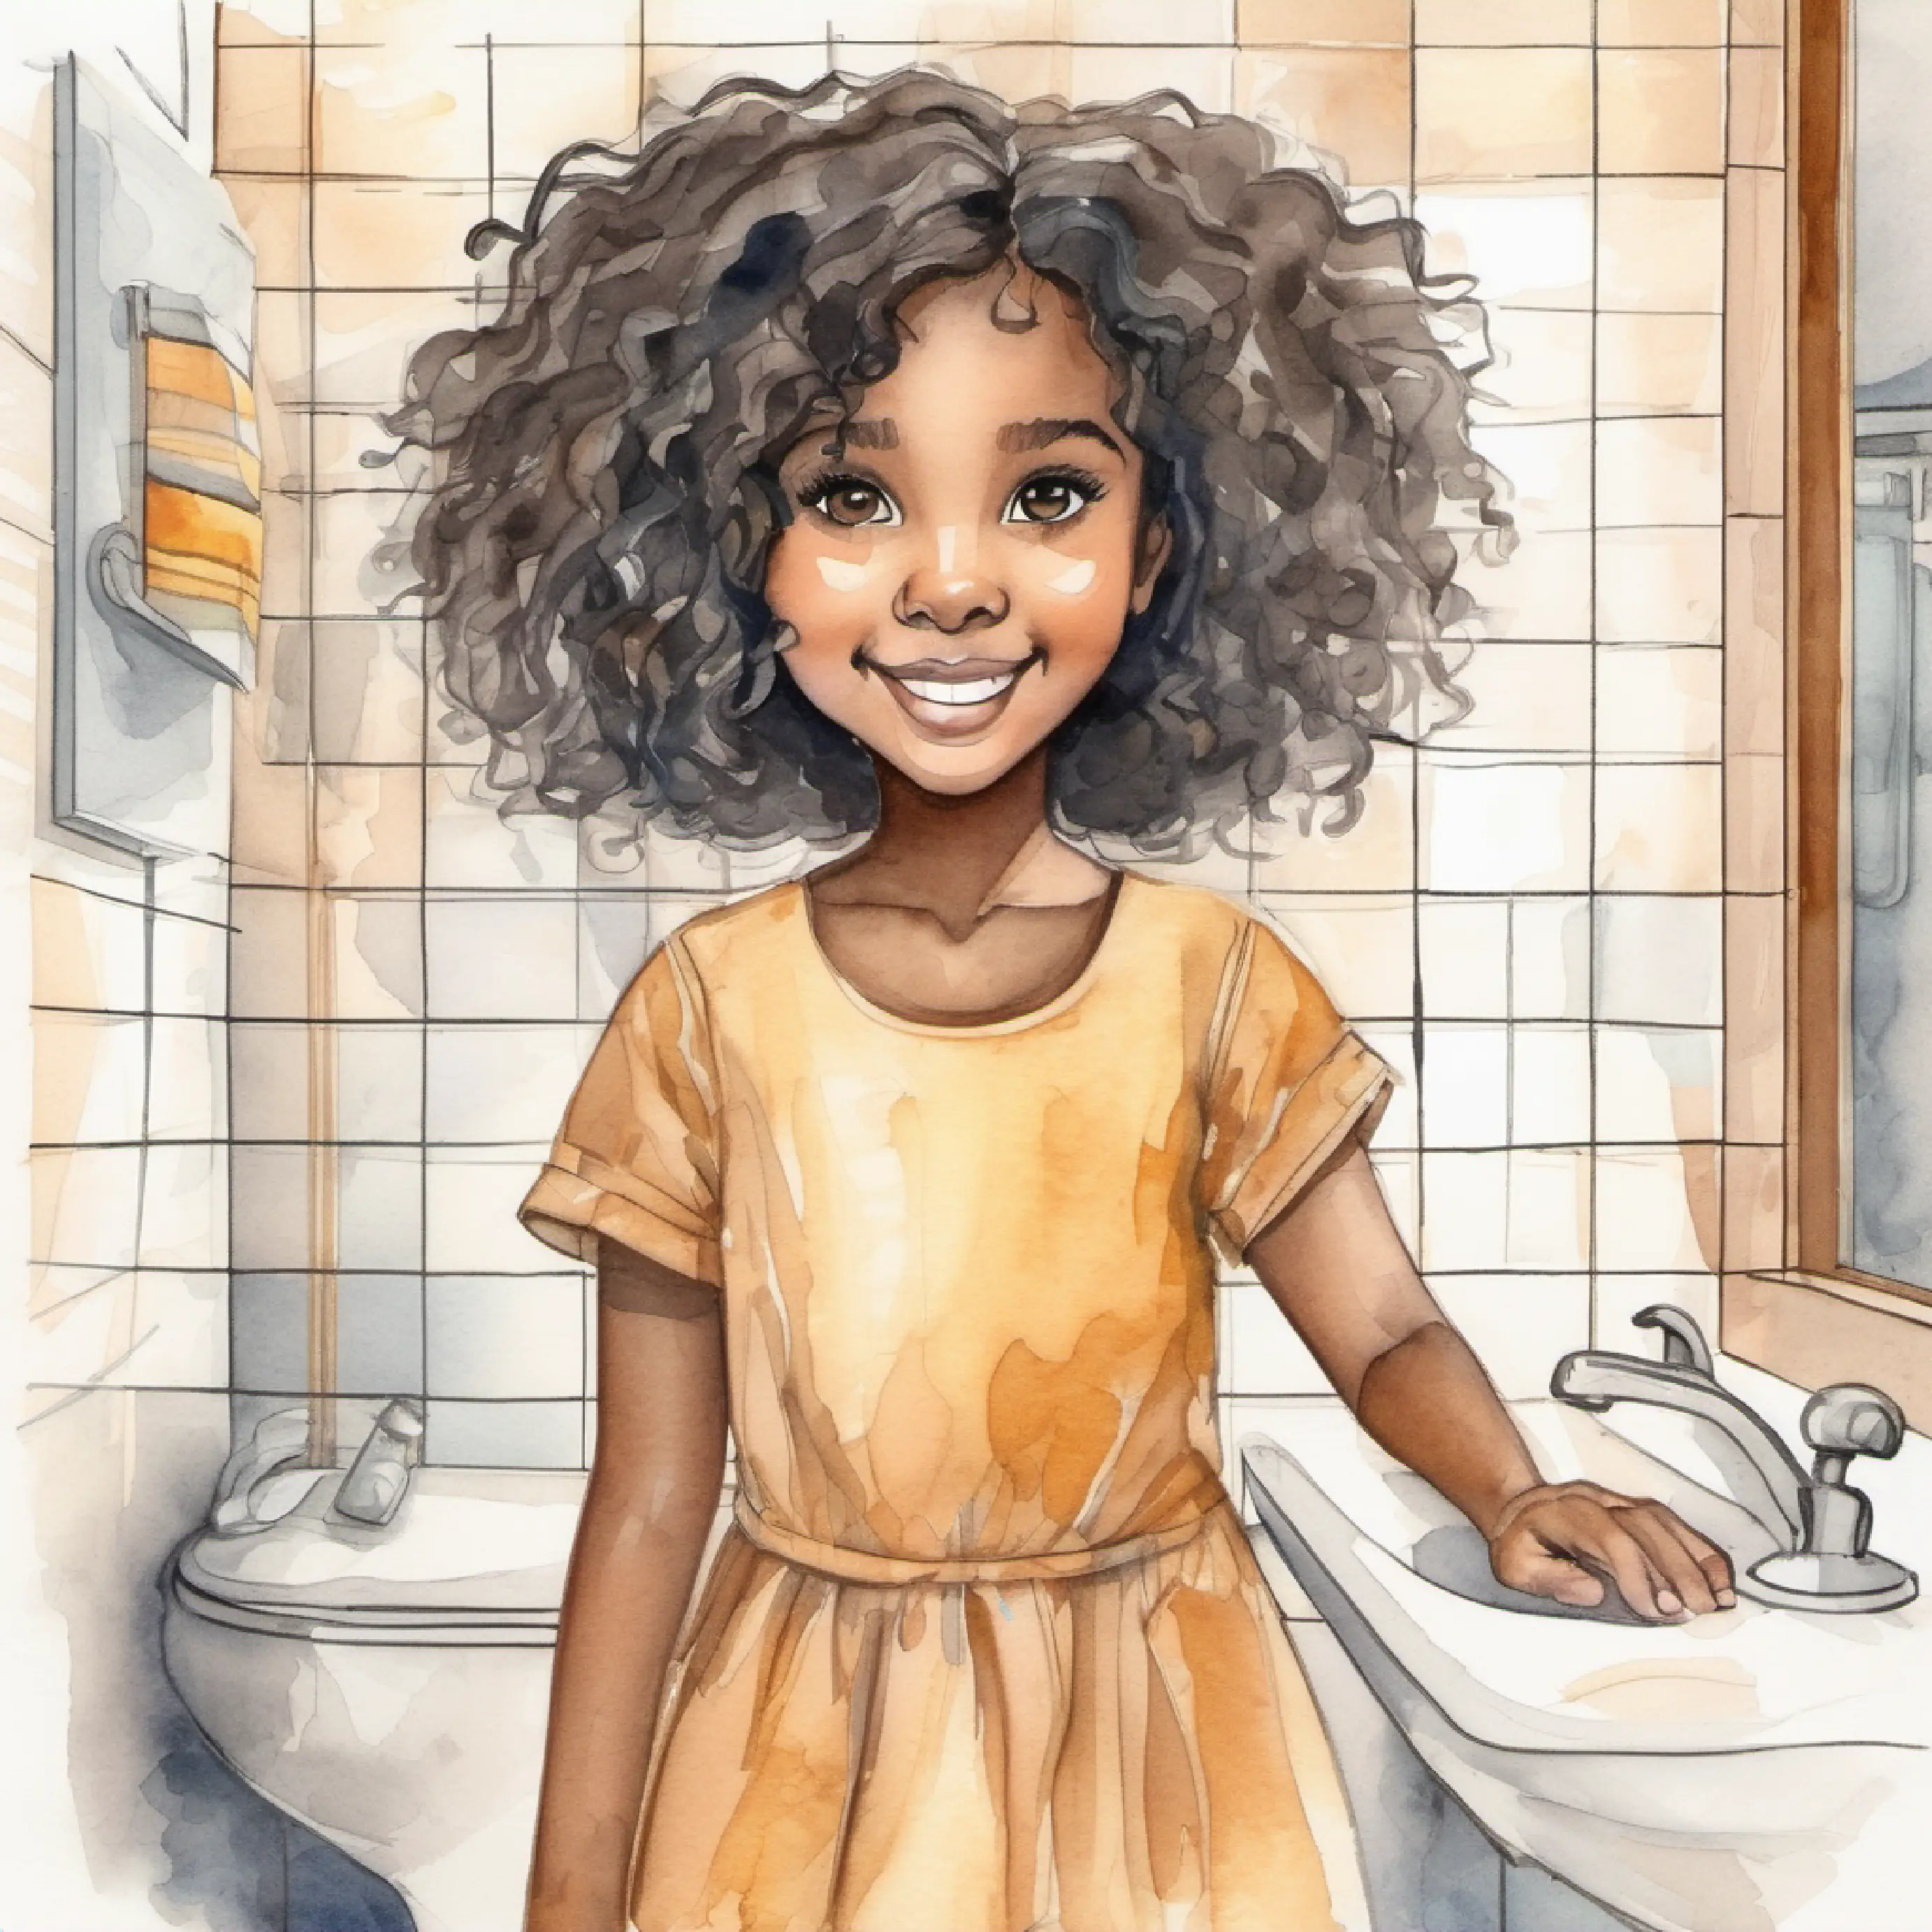 Bathroom, Cheerful girl, brown skin, curly black hair, big brown eyes leaving without washing hands properly.